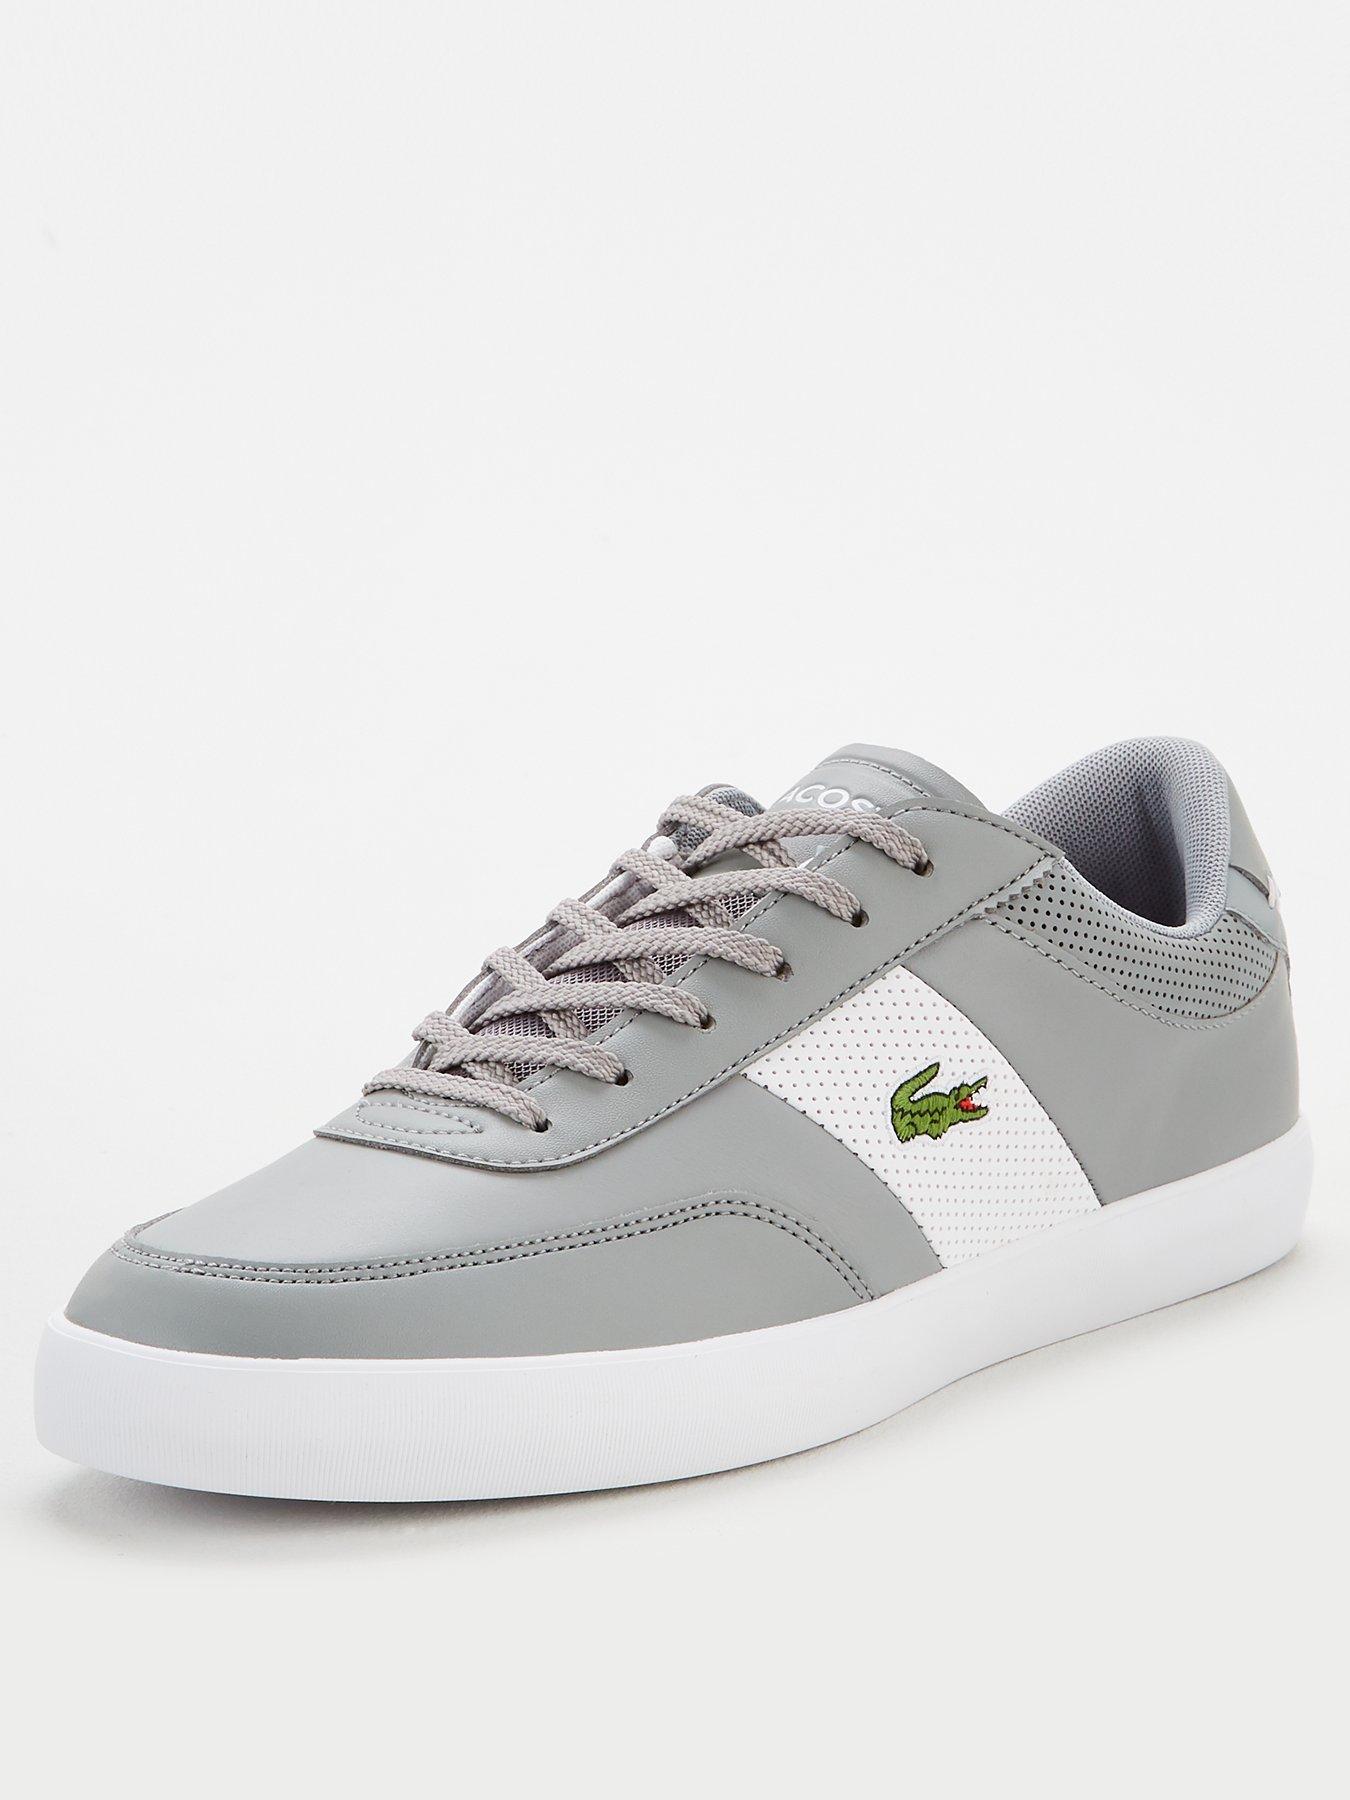 mens white leather lacoste trainers